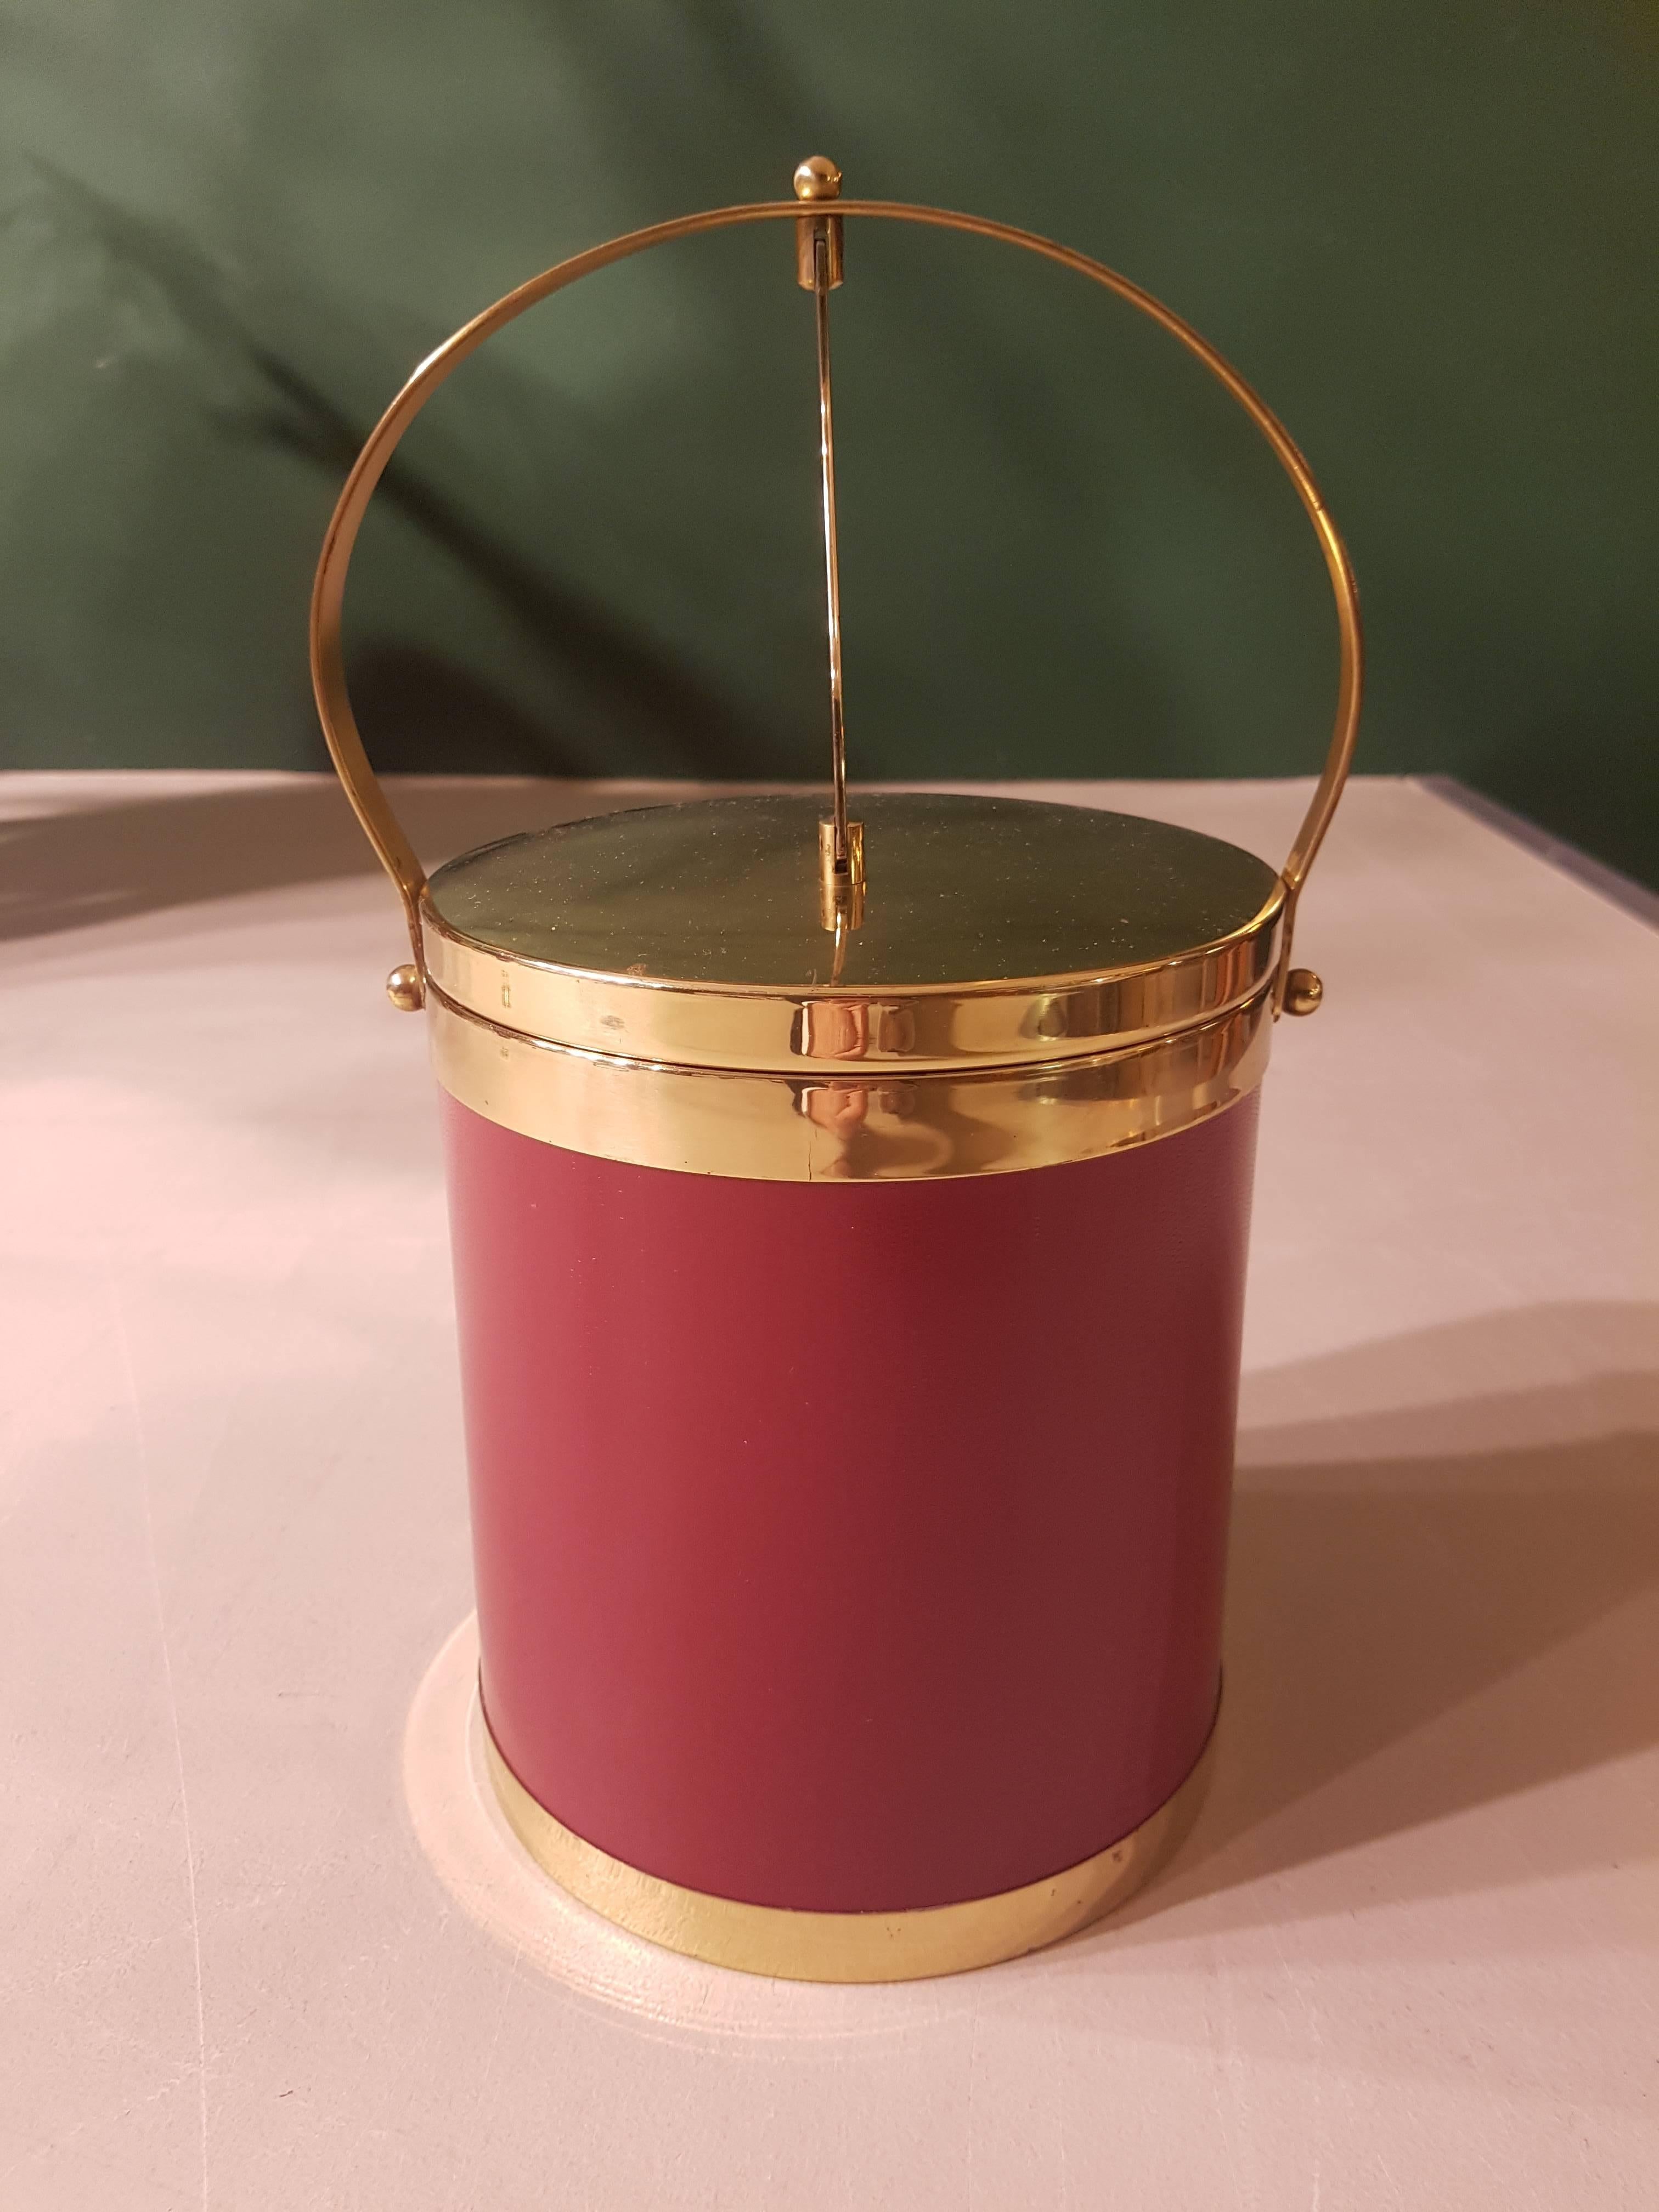 20th century Belgian red ice bucket made of brass and imitation leather from the 1970s.